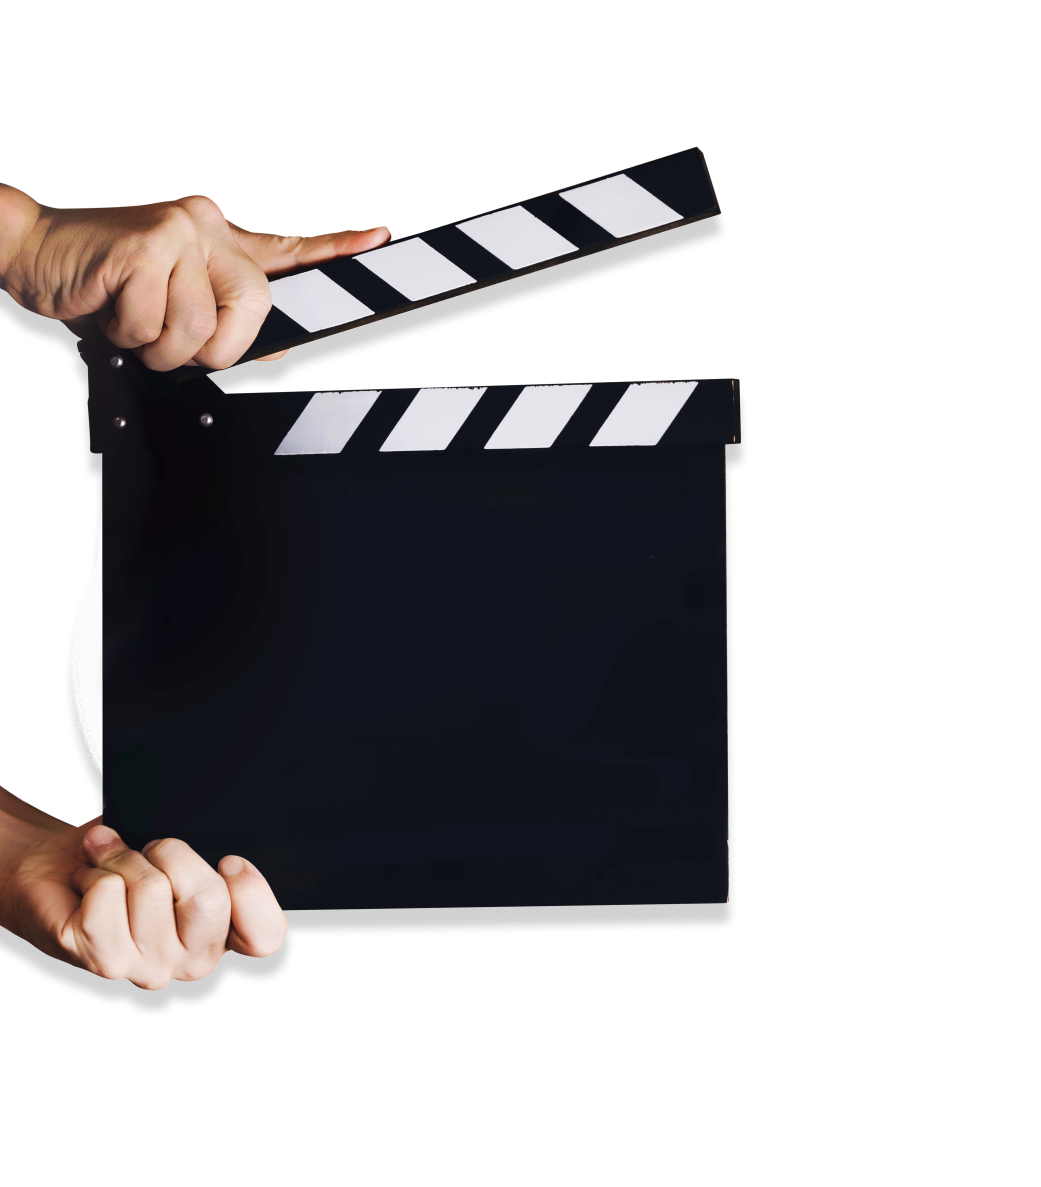 Marketing Video Production Services